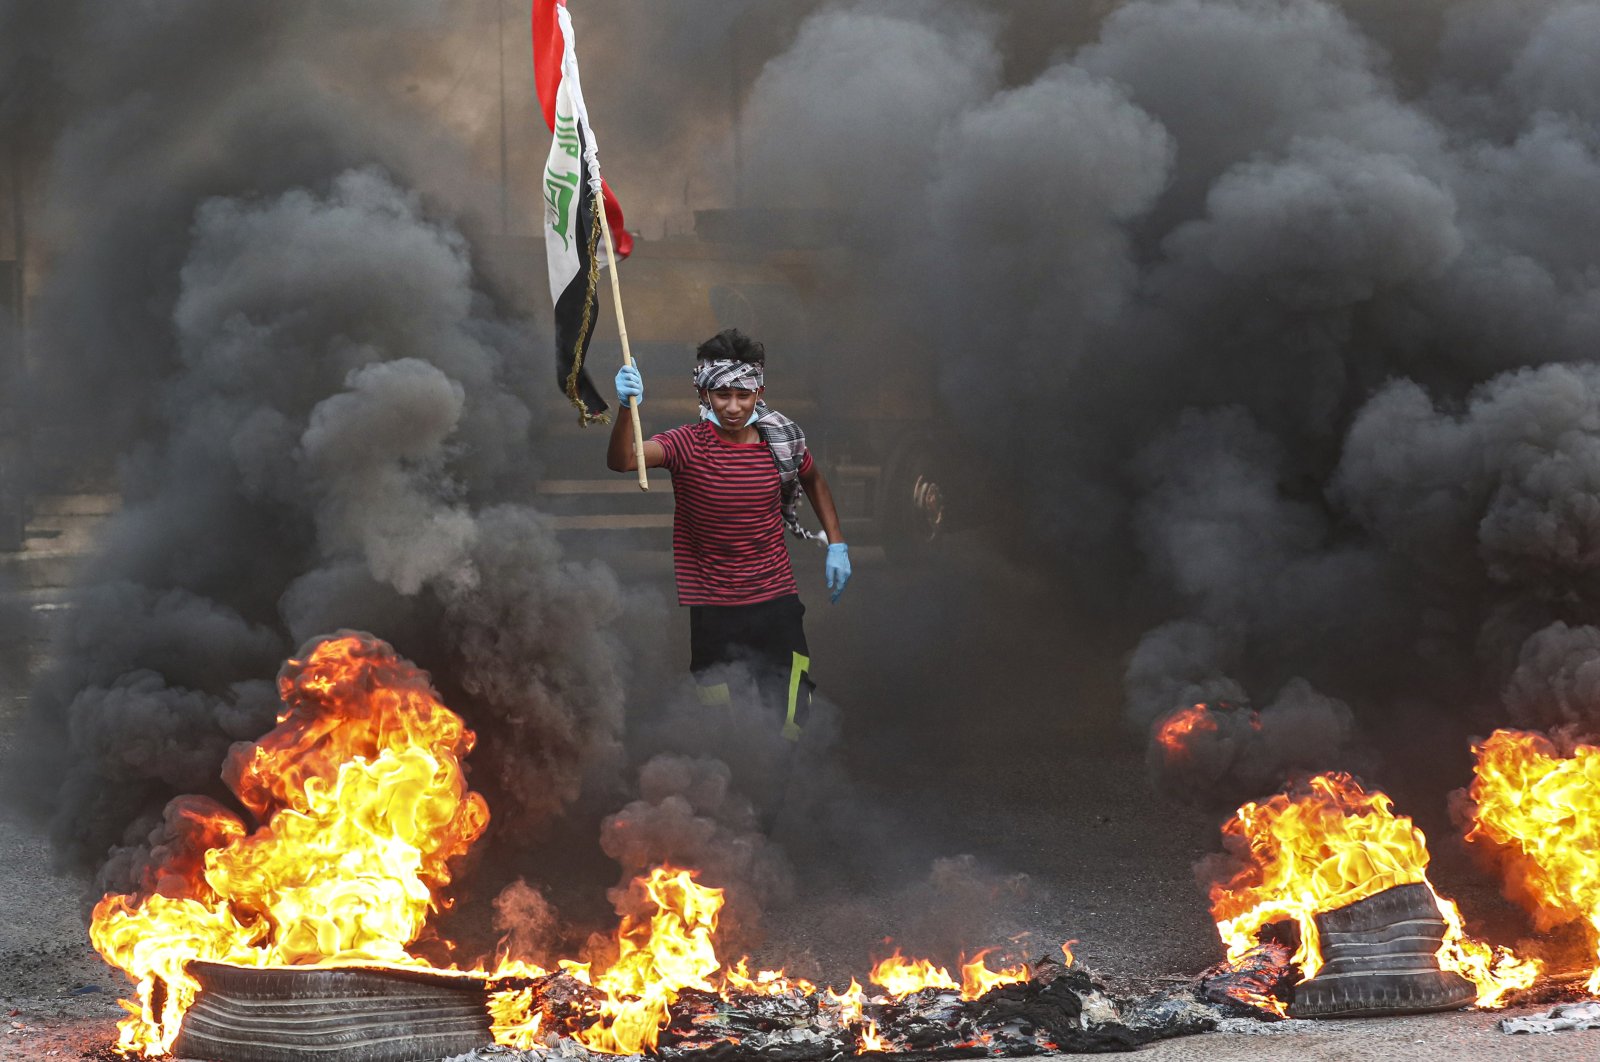 Protesters burn tires in front of the provincial council building during a demonstration where they demanded better public services, jobs and an end to corruption, Basra, southeast of Baghdad, Iraq, July 14, 2020. (AP Photo)